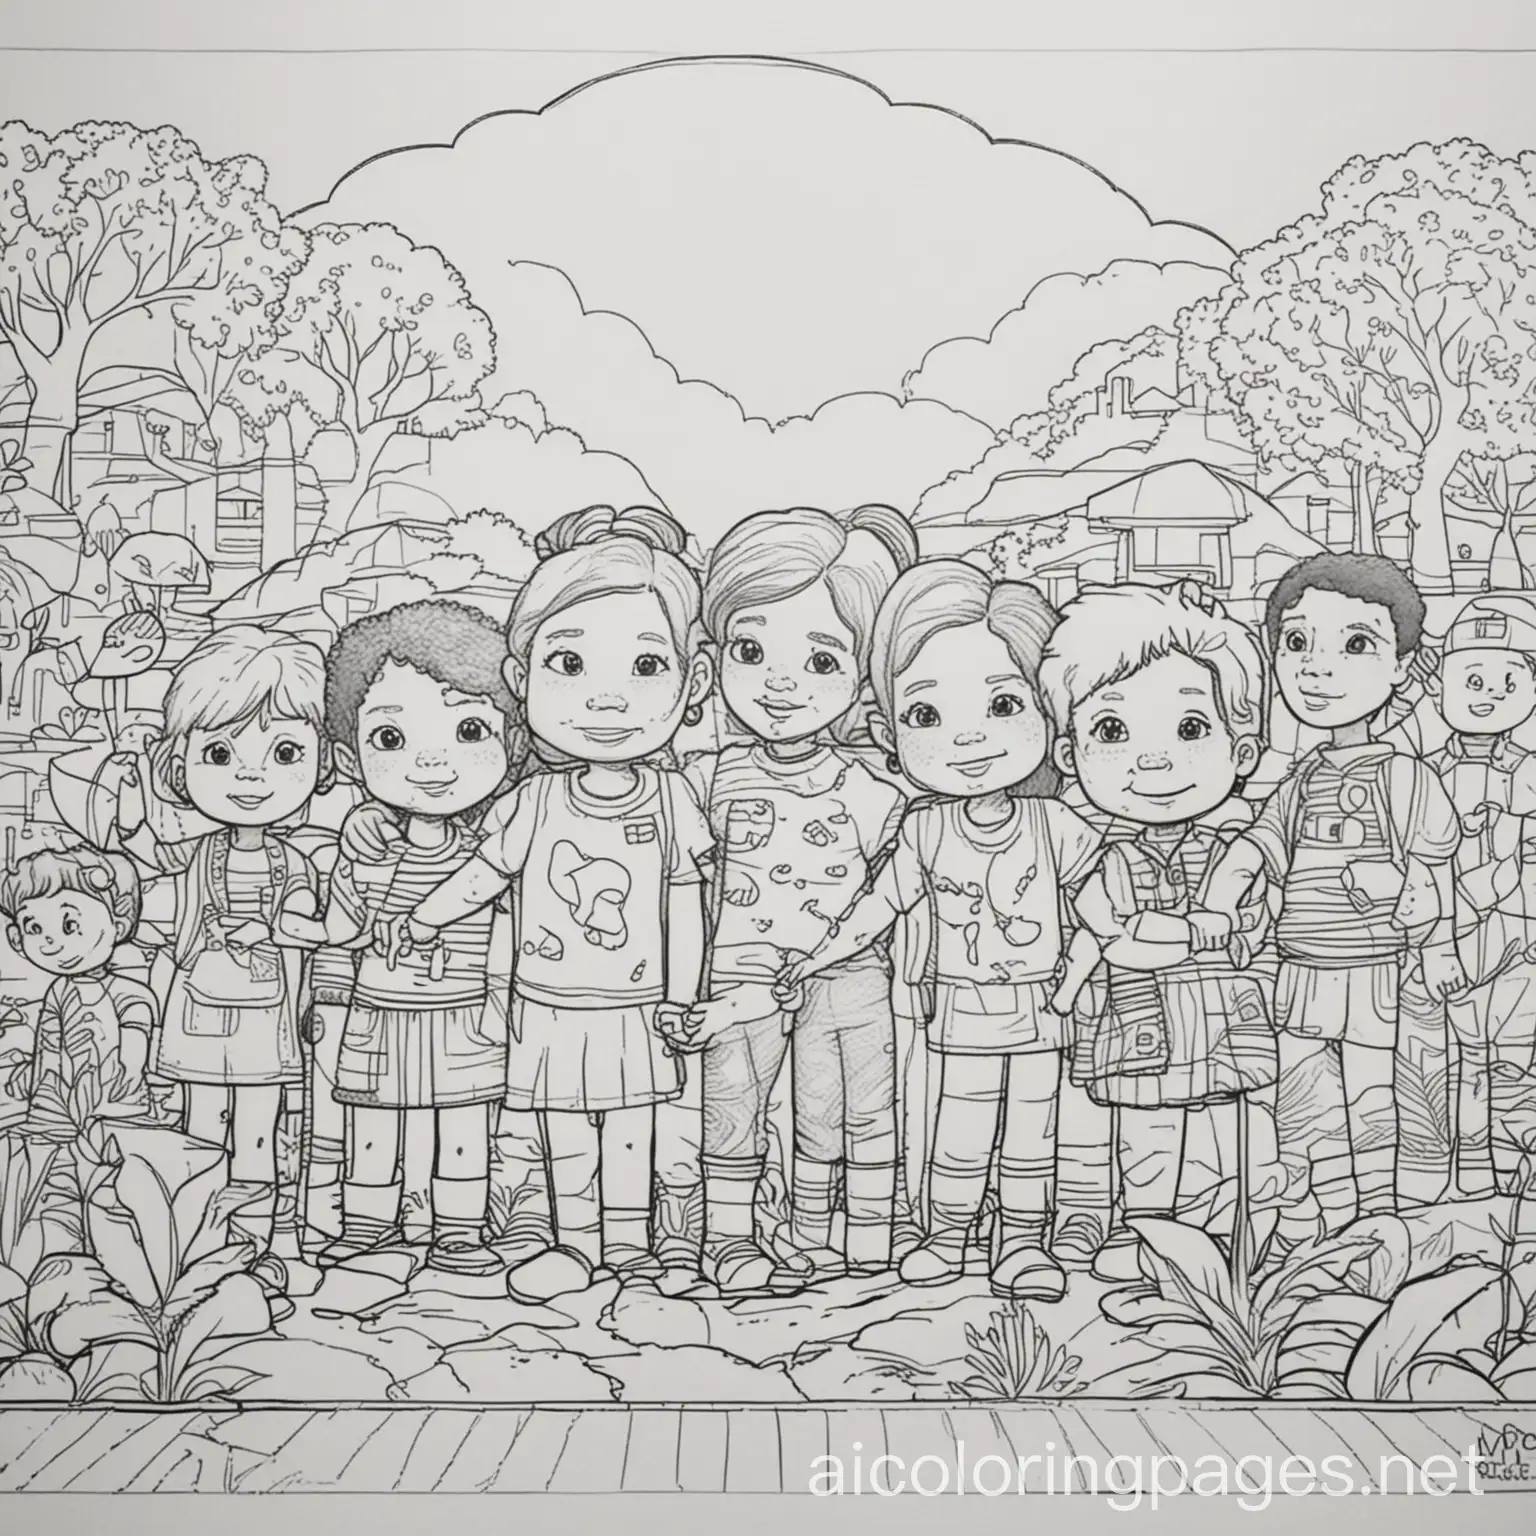 Early-Childhood-Education-Equity-and-Diversity-Coloring-Page